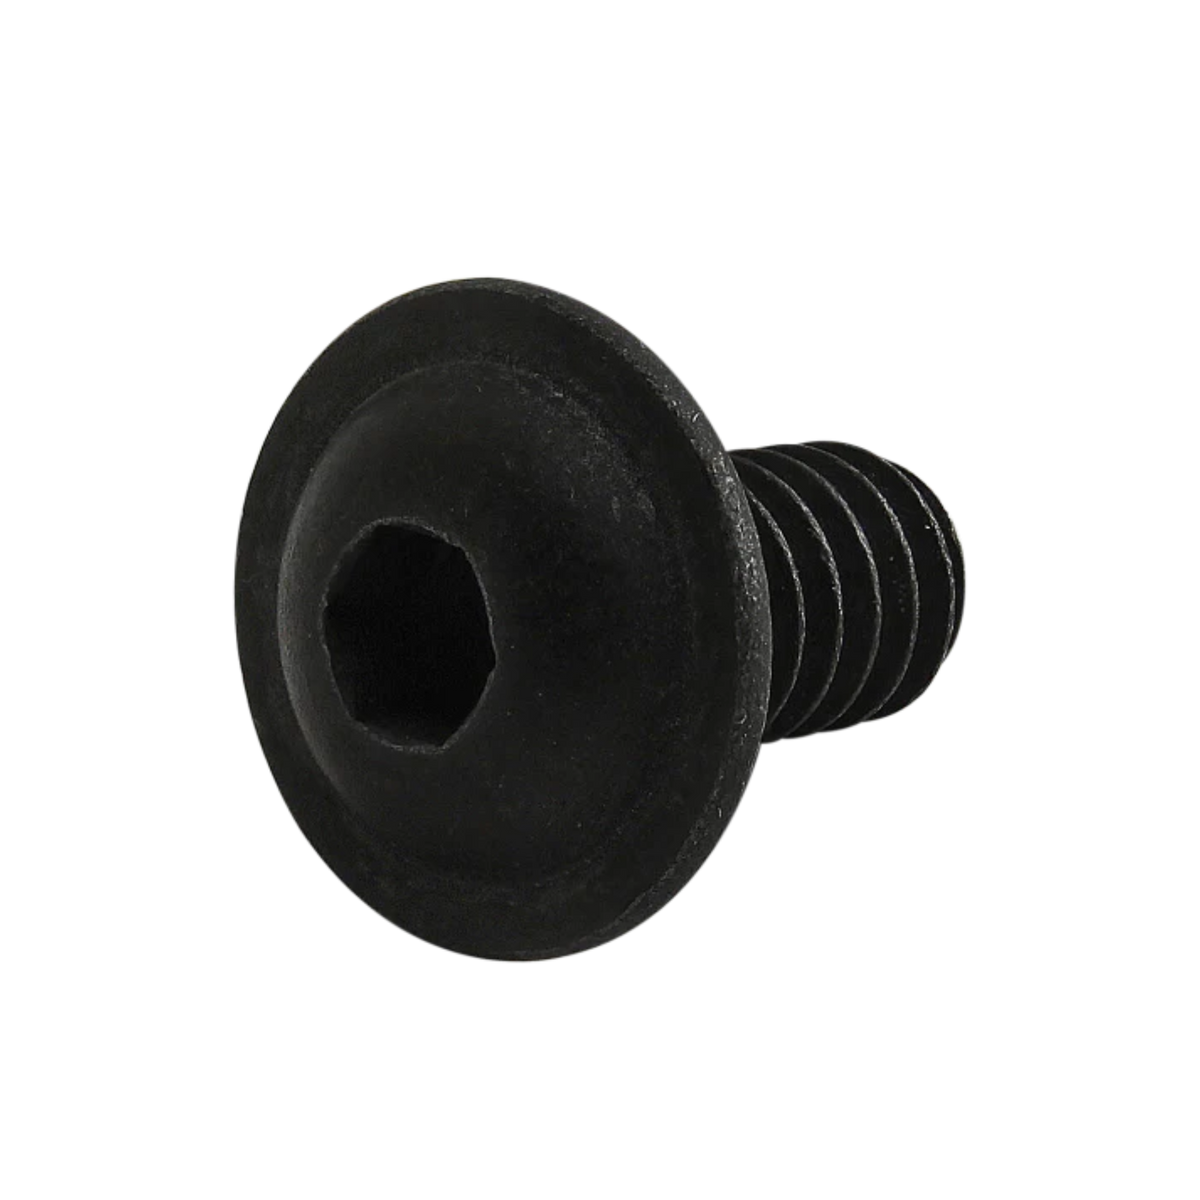 side view of a black metal screw with the head on the left and threading on the right